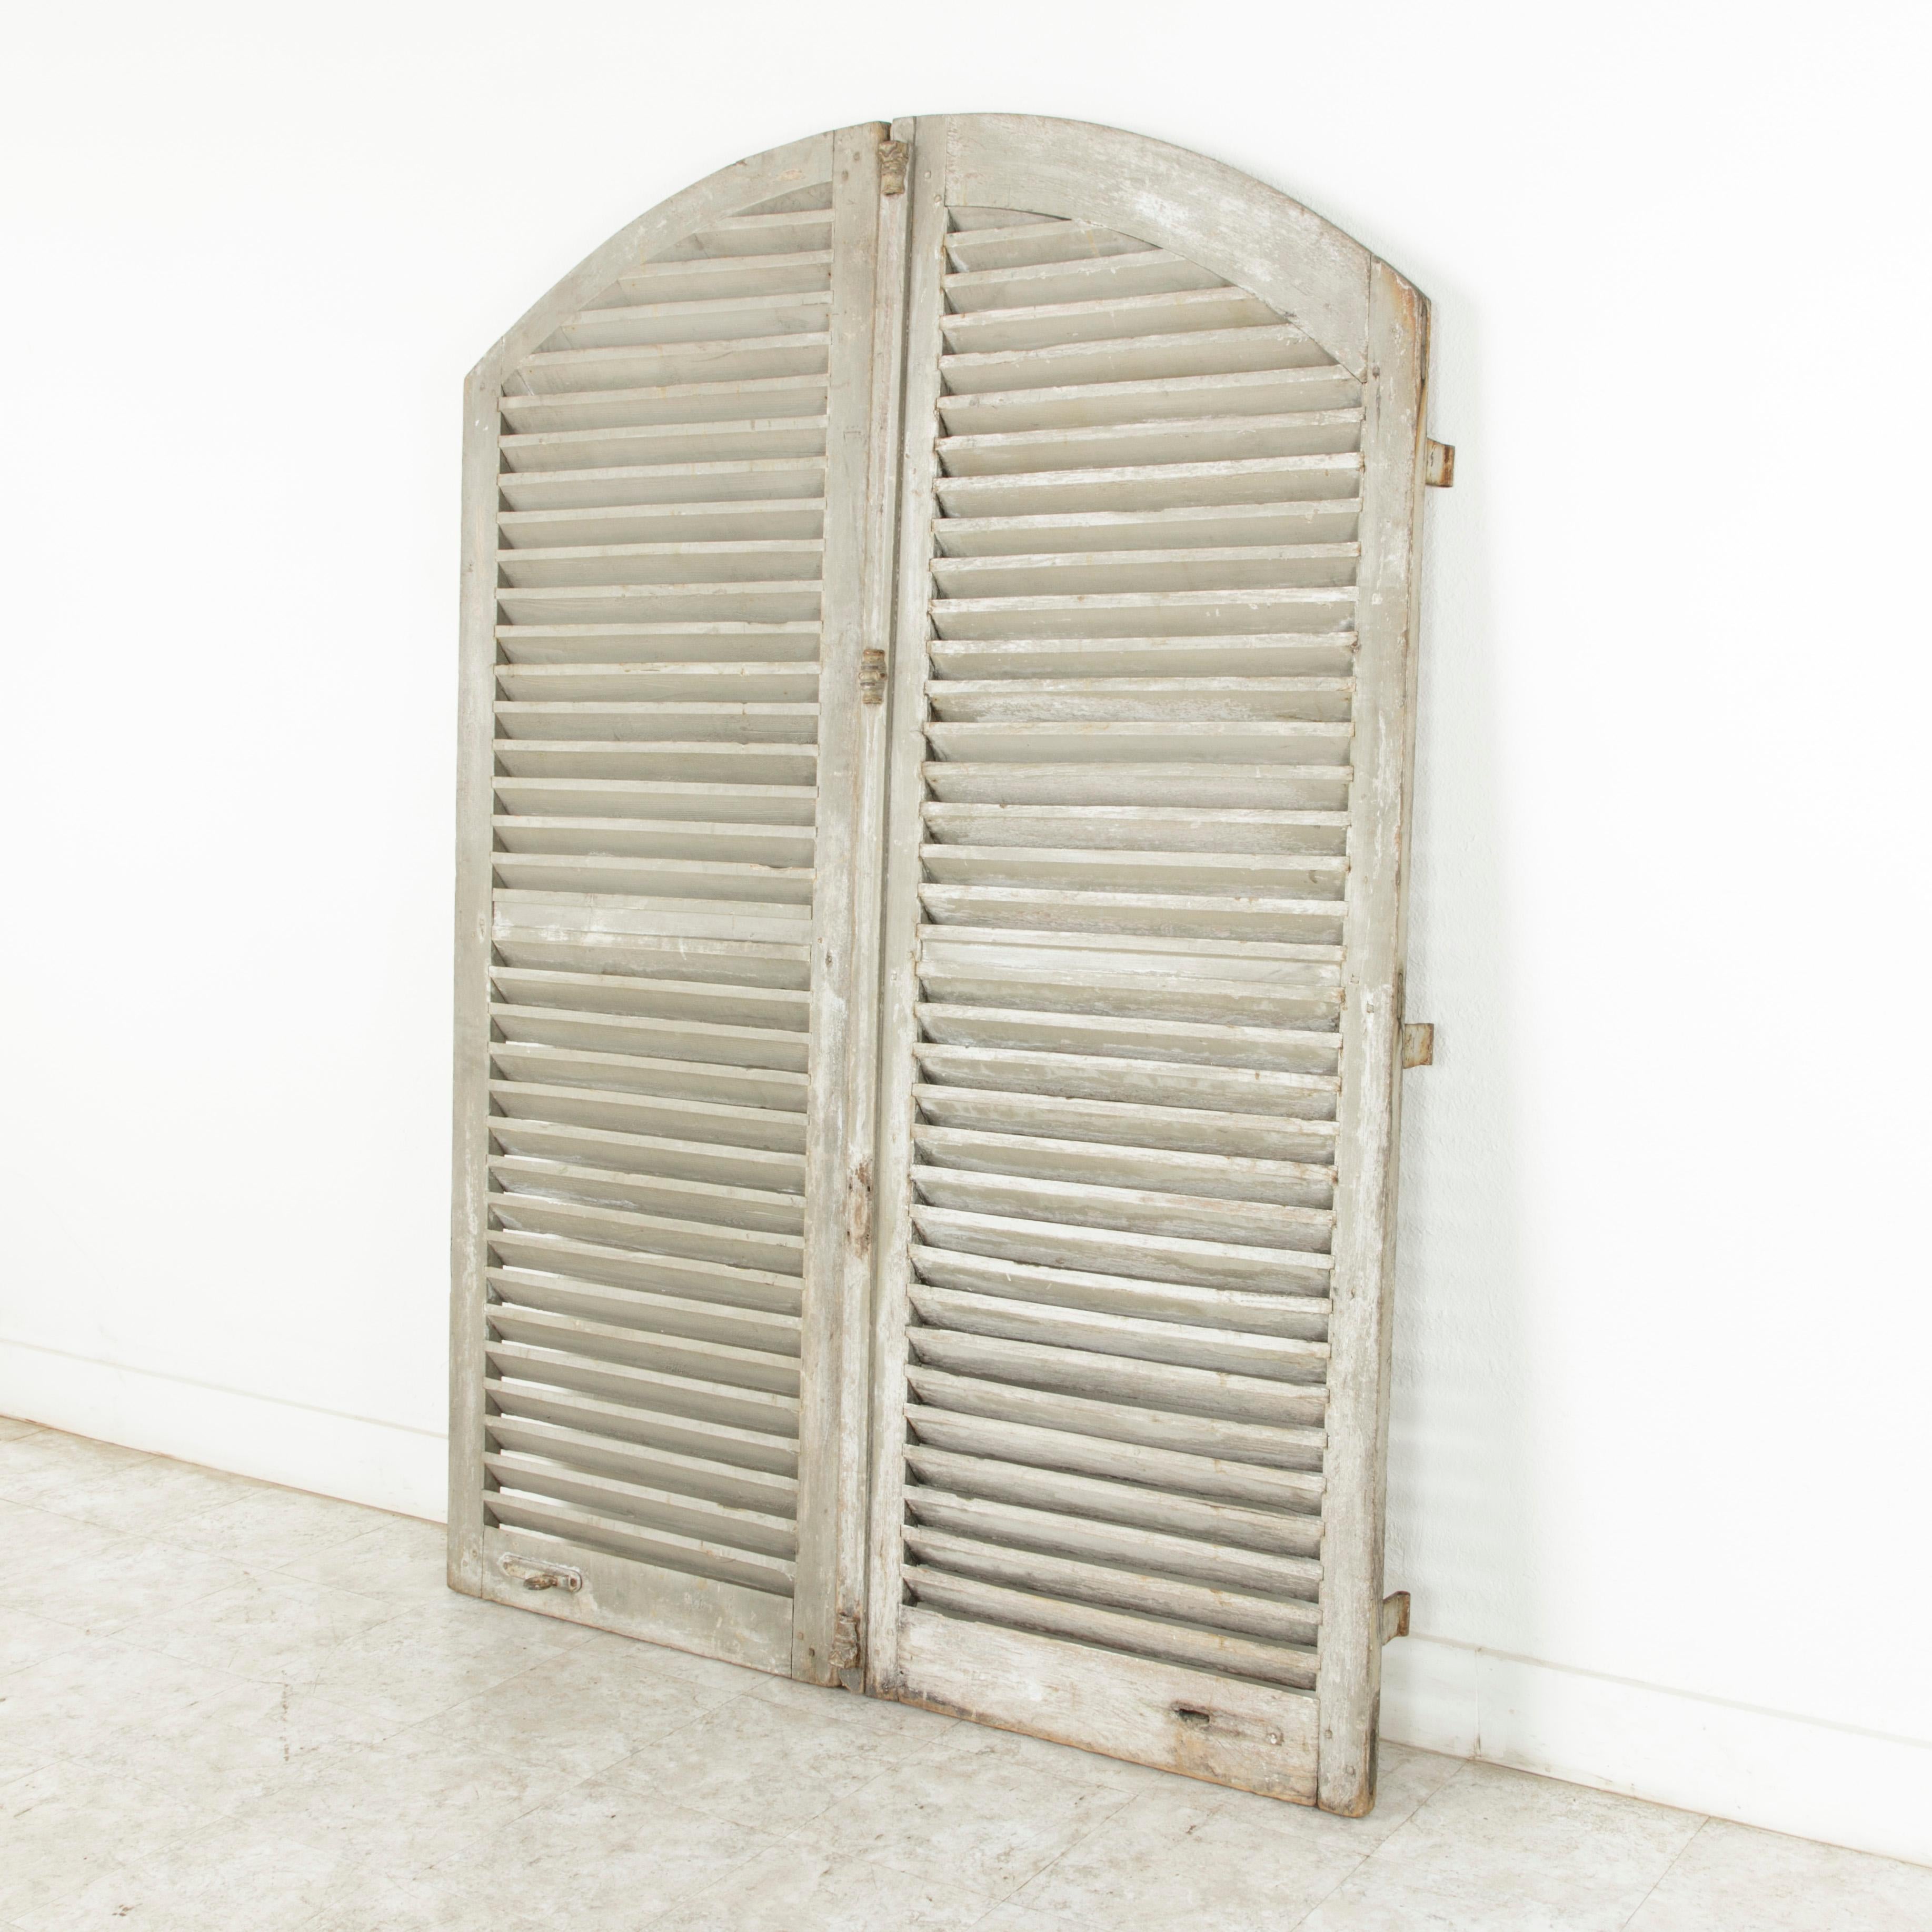 Standing at an impressive 82.5 inches in height, this pair of French shutters from the early 20th century features an arched top, slanted slats, and their original hardware. With a 61 inch total width, this tall pair of shutters painted in pale grey